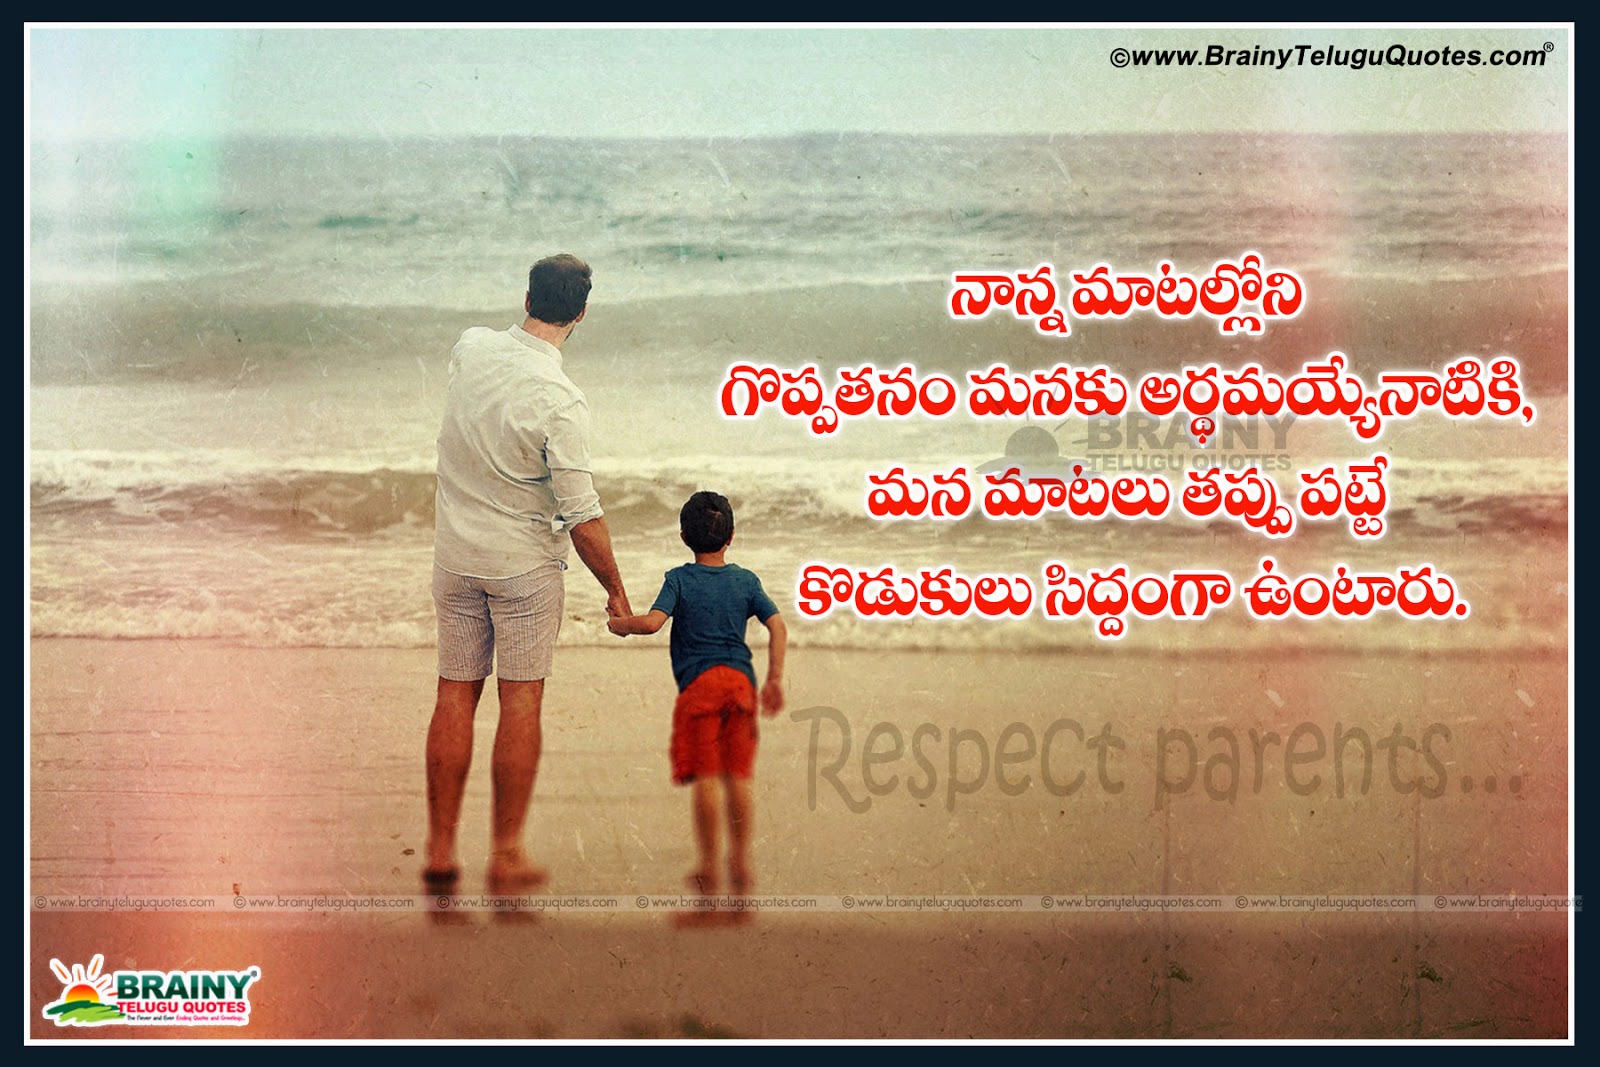 Heart Touching Father Love Quotations In Telugu Language With Father And Child Hd Wallpapers Brainyteluguquotes Comtelugu Quotes English Quotes Hindi Quotes Tamil Quotes Greetings